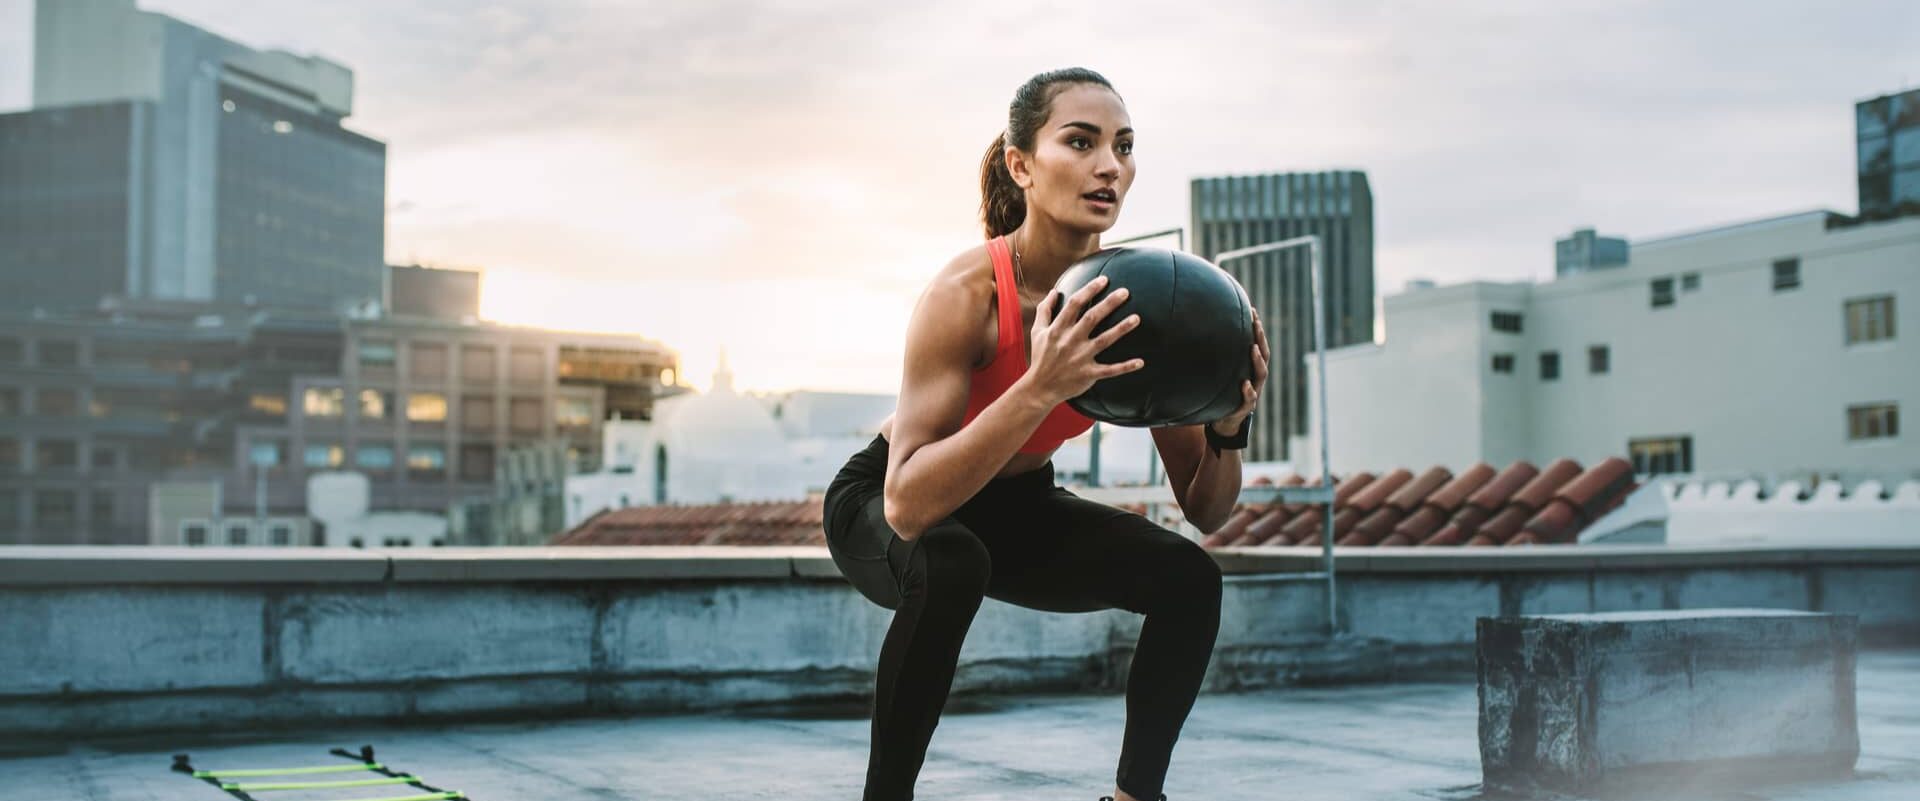 fit woman exercises with medicine ball e1654791154664